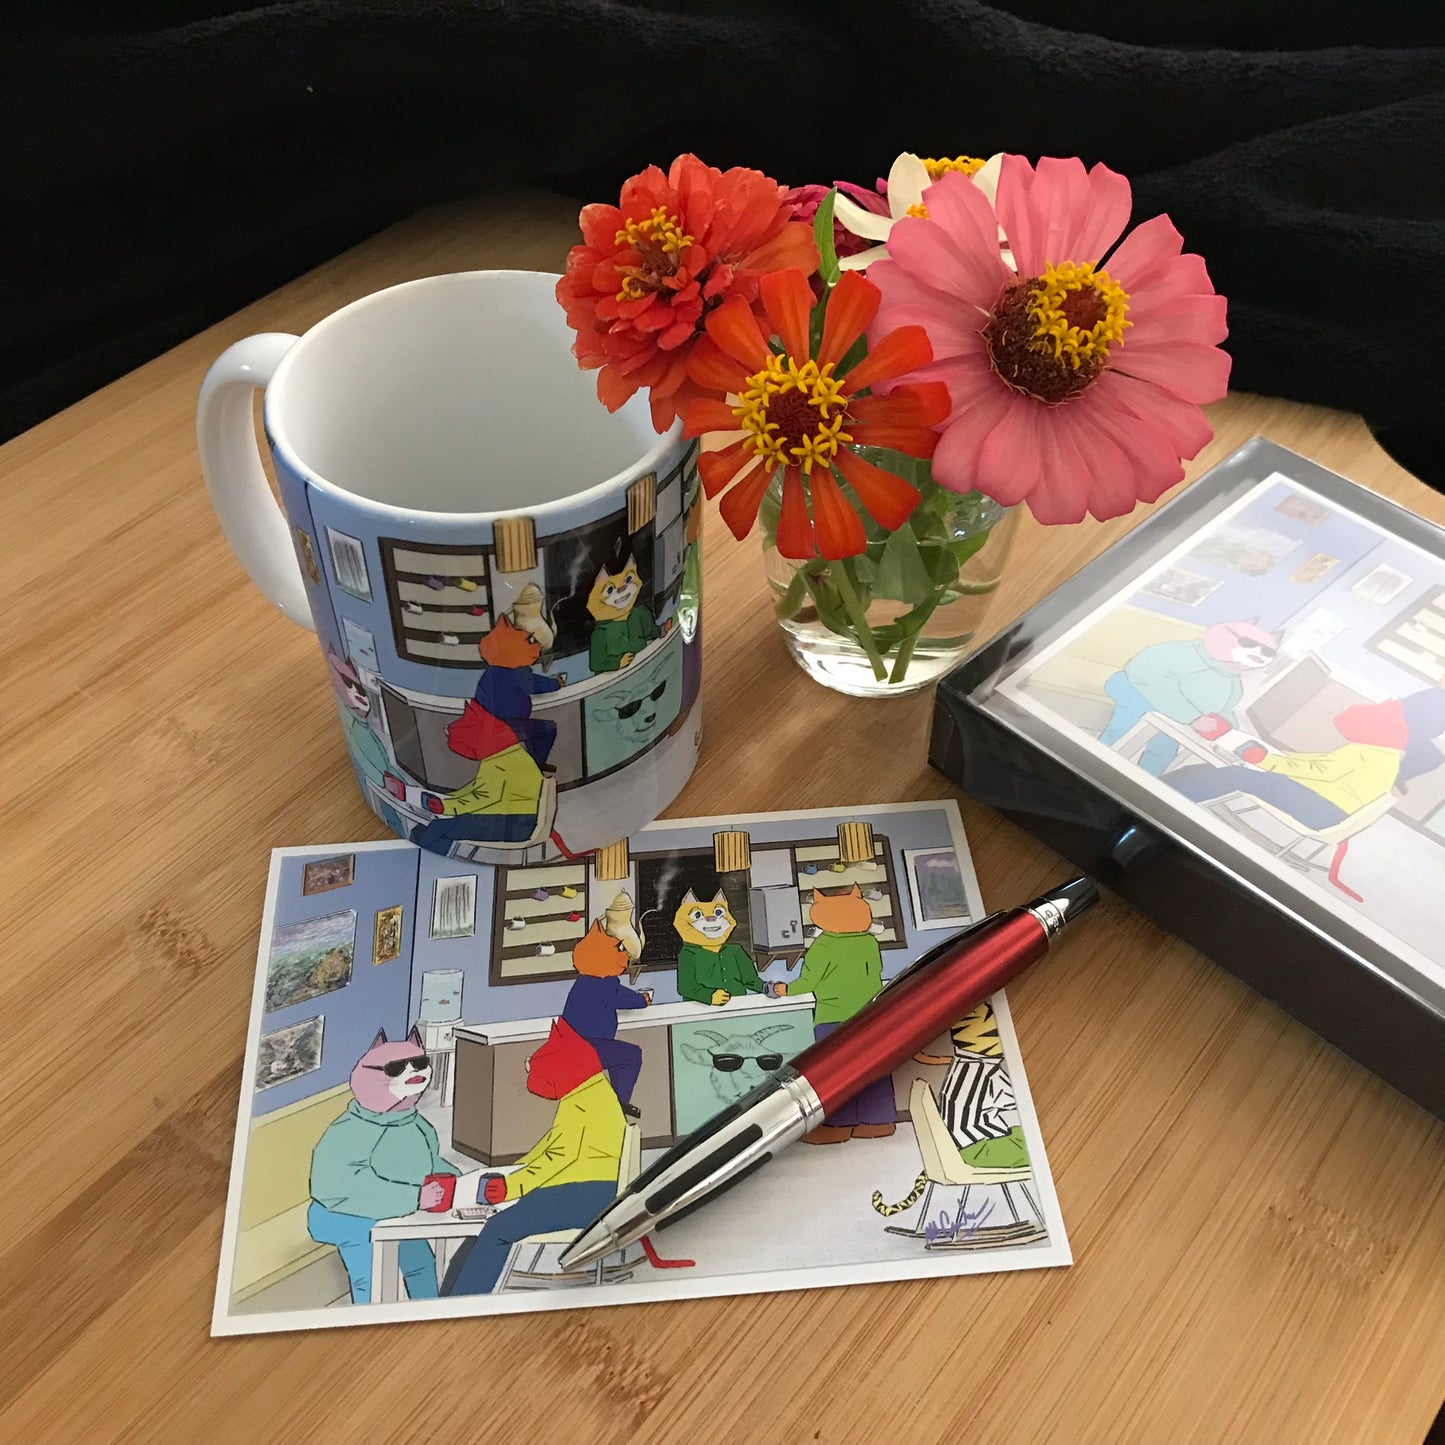 Coffee Cats Notecards and Bundles - Signed